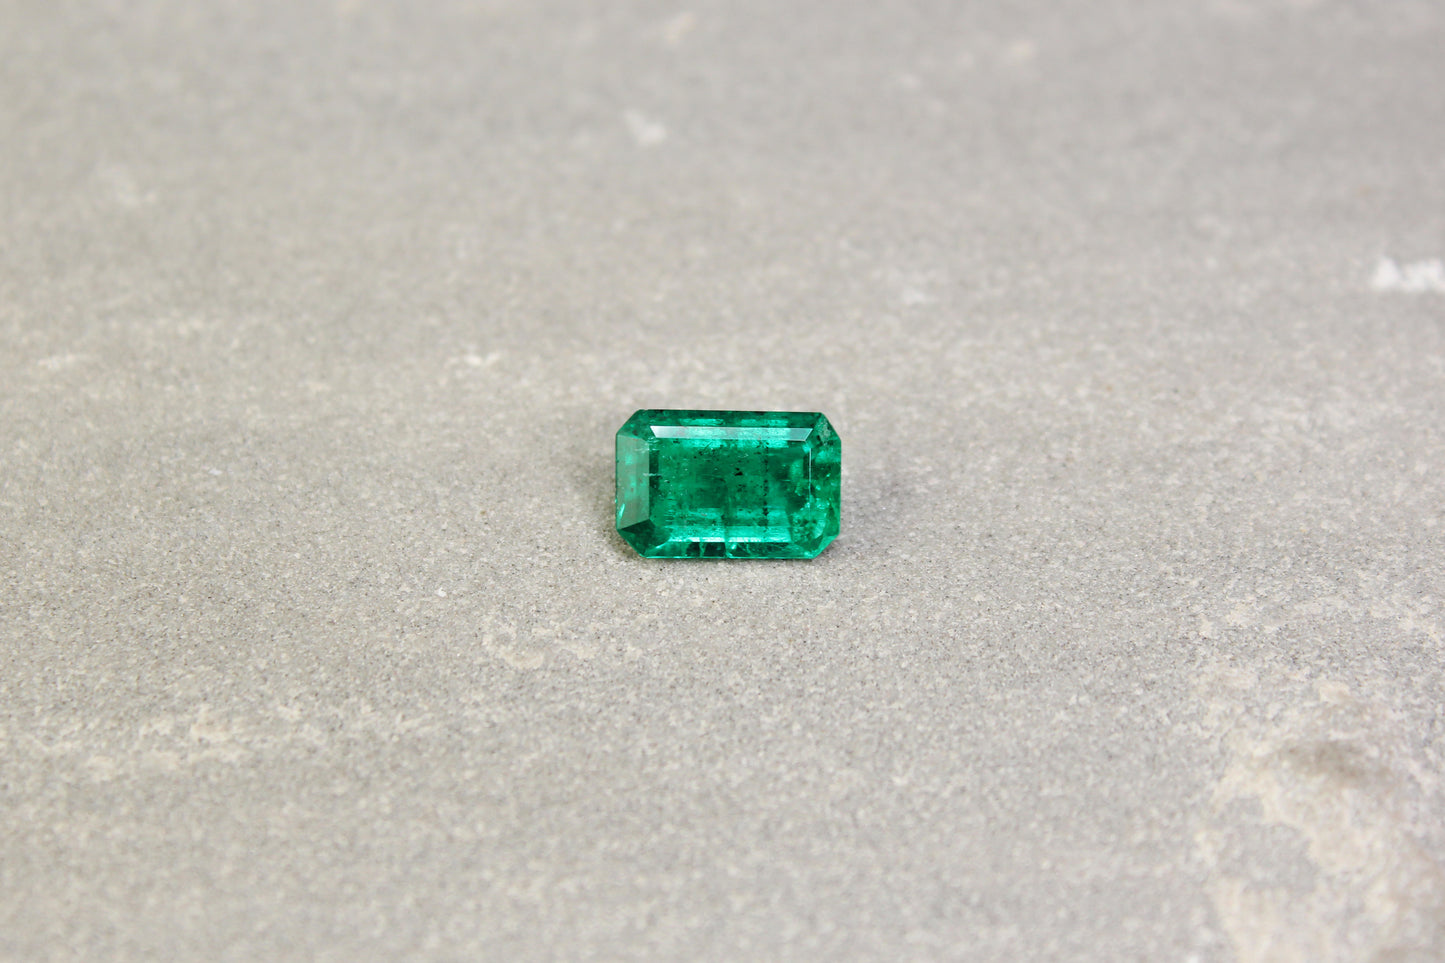 2.32ct Octagon Emerald, Moderate Oil, Colombia - 10.55 x 6.91 x 4.17mm